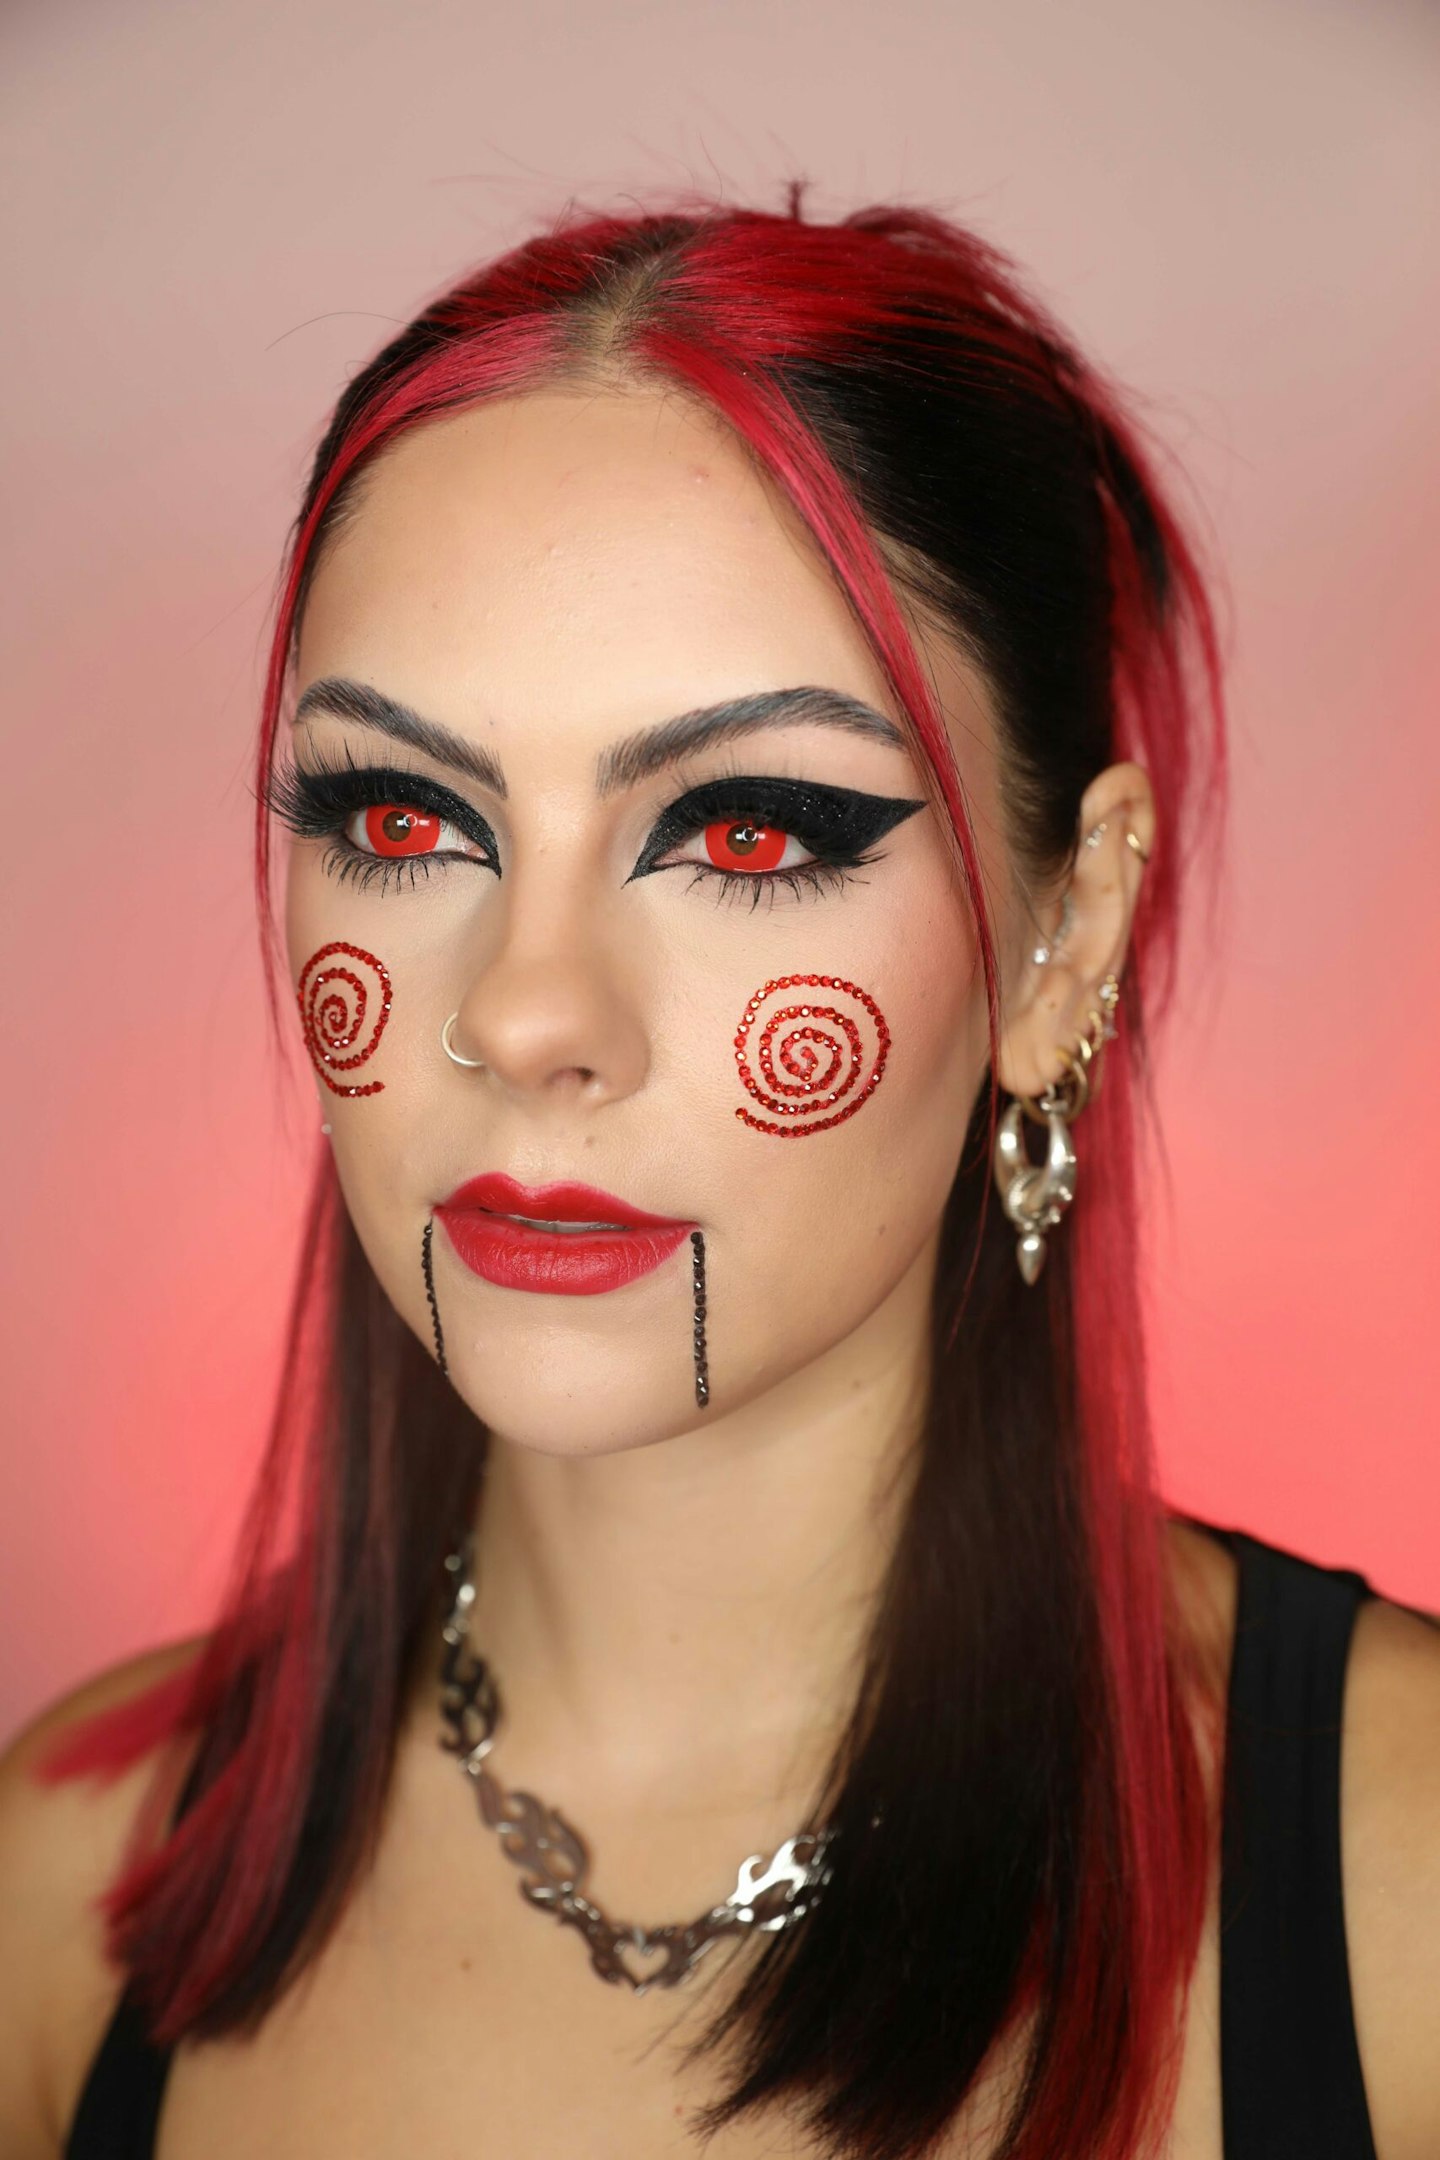 SAW character Jigsaw inspired make up